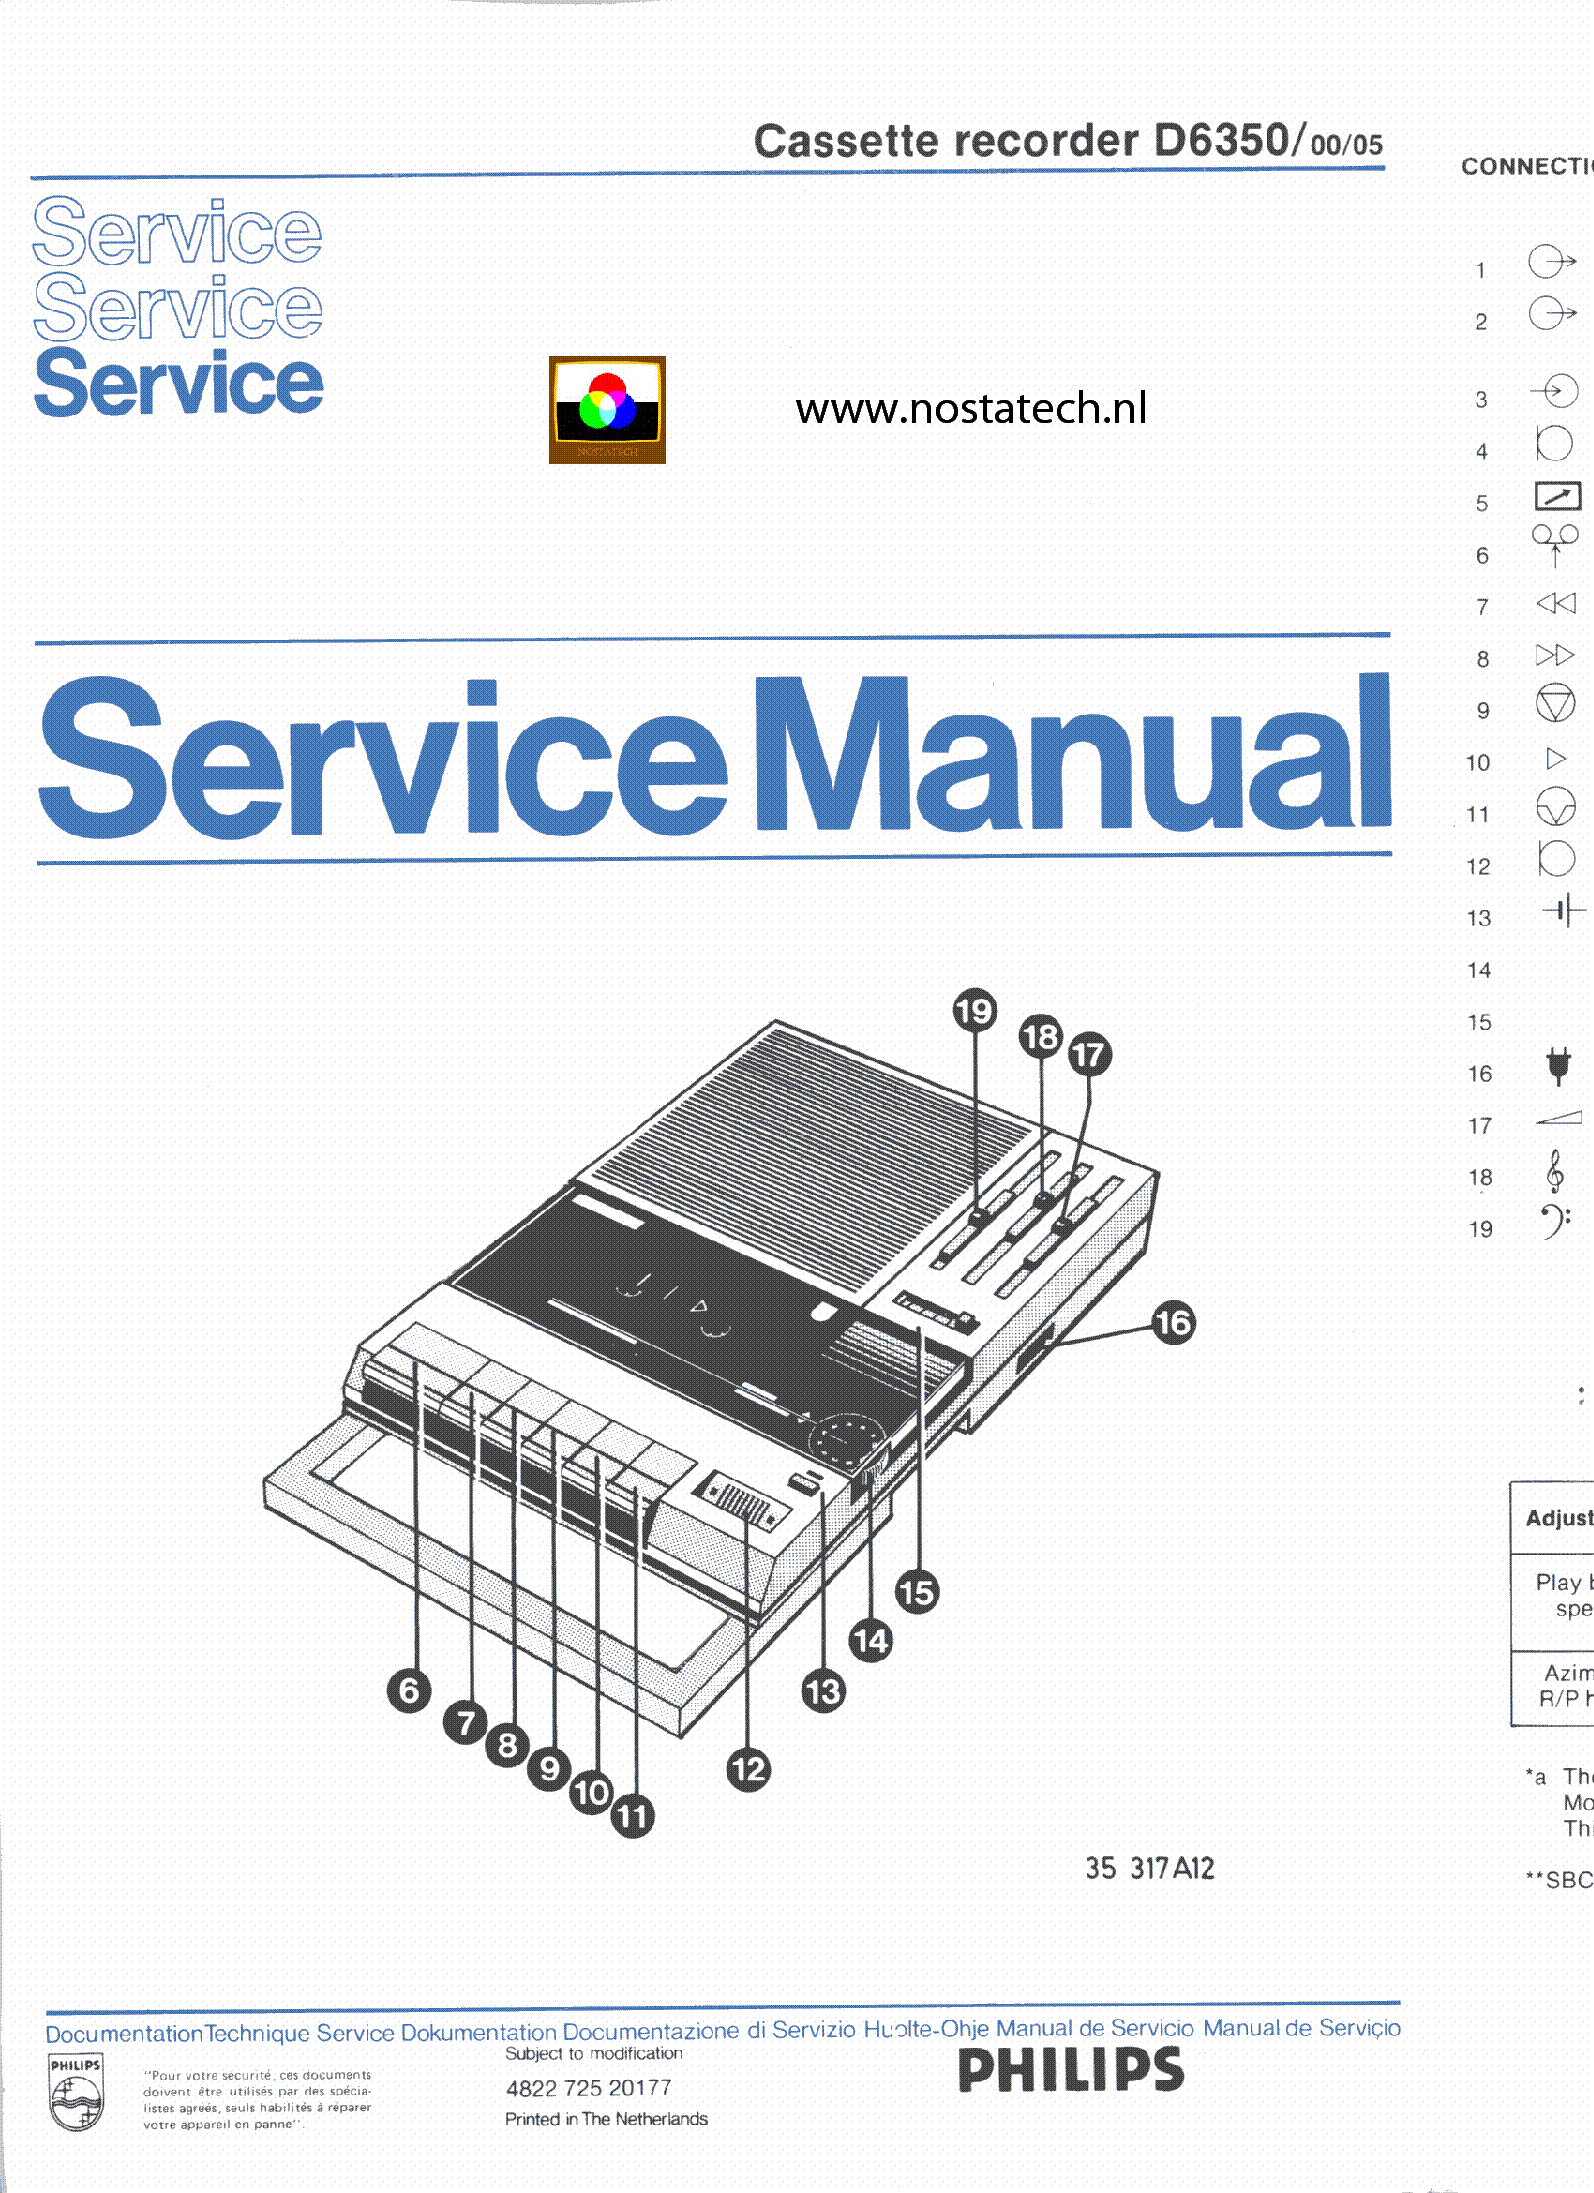 PHILIPS D6350 TABLETOP SM service manual (1st page)